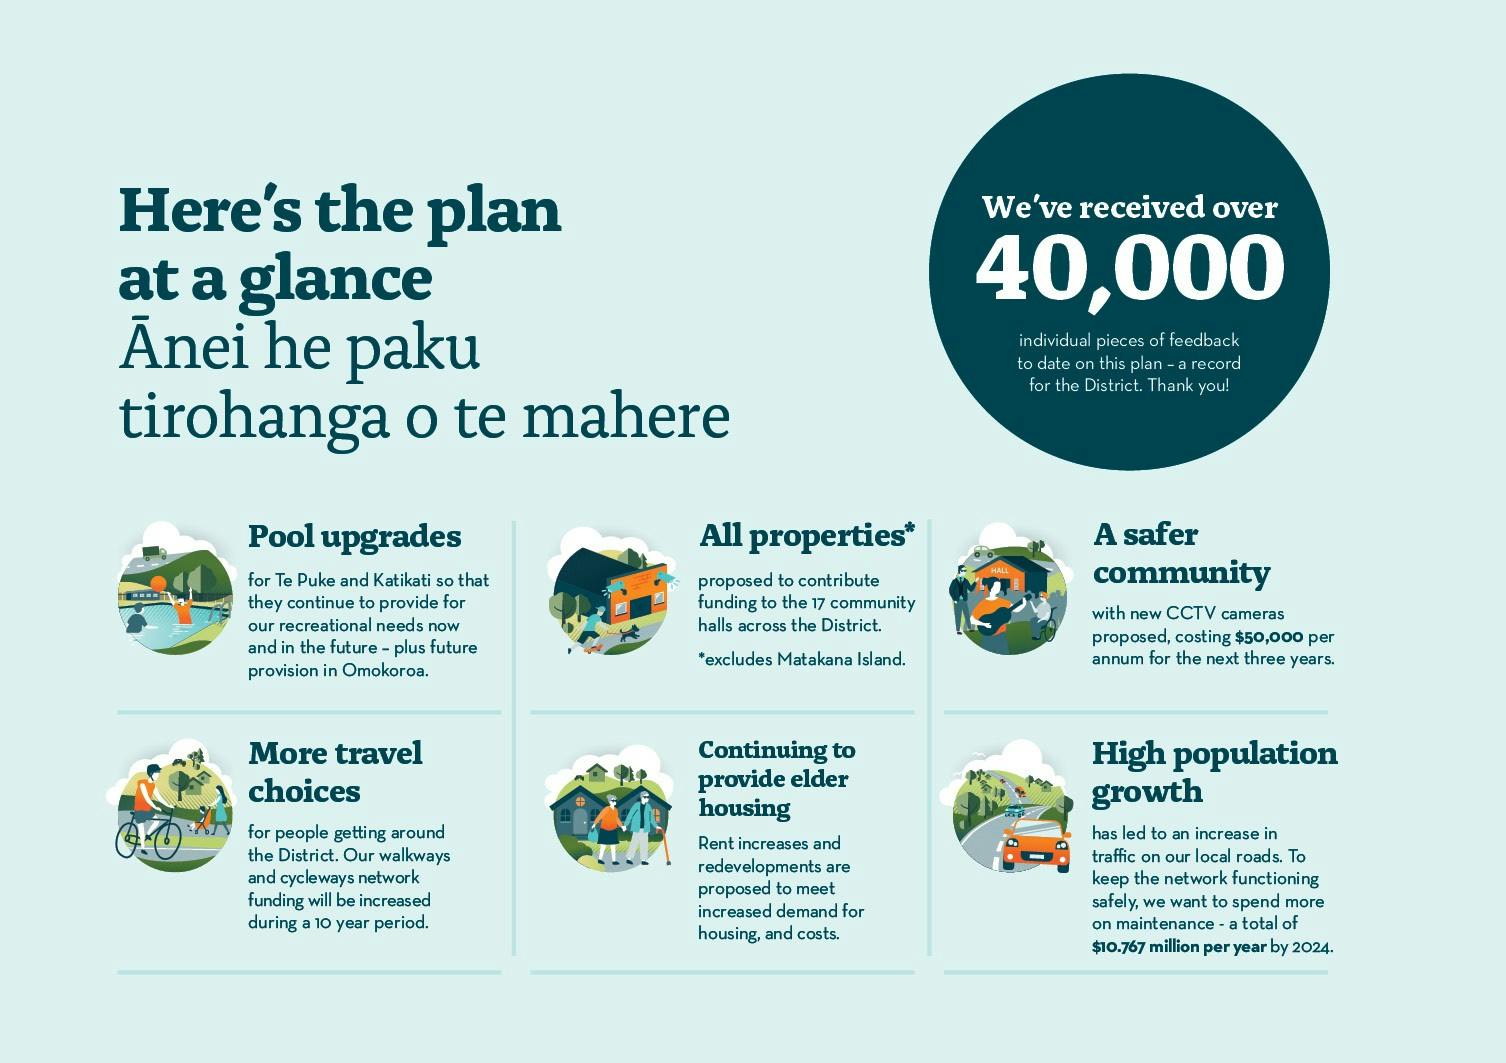 Our plan at a glance 01.jpg